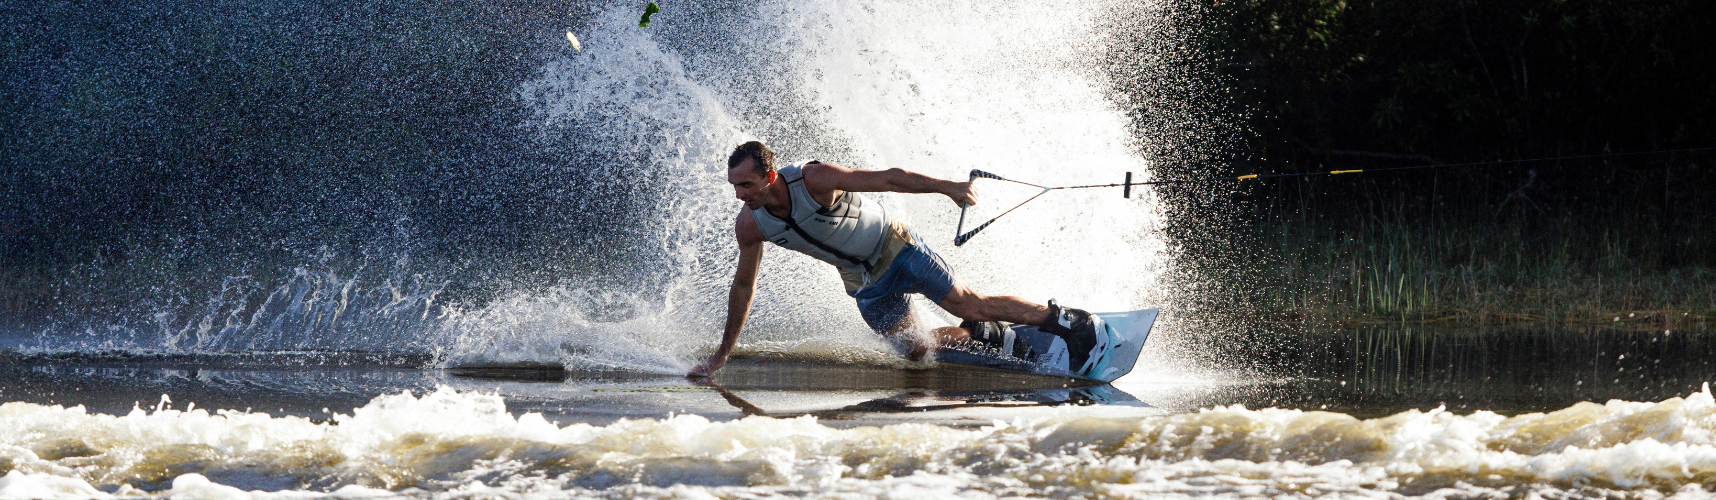 Man tilting and touching the water while riding a wakeboard